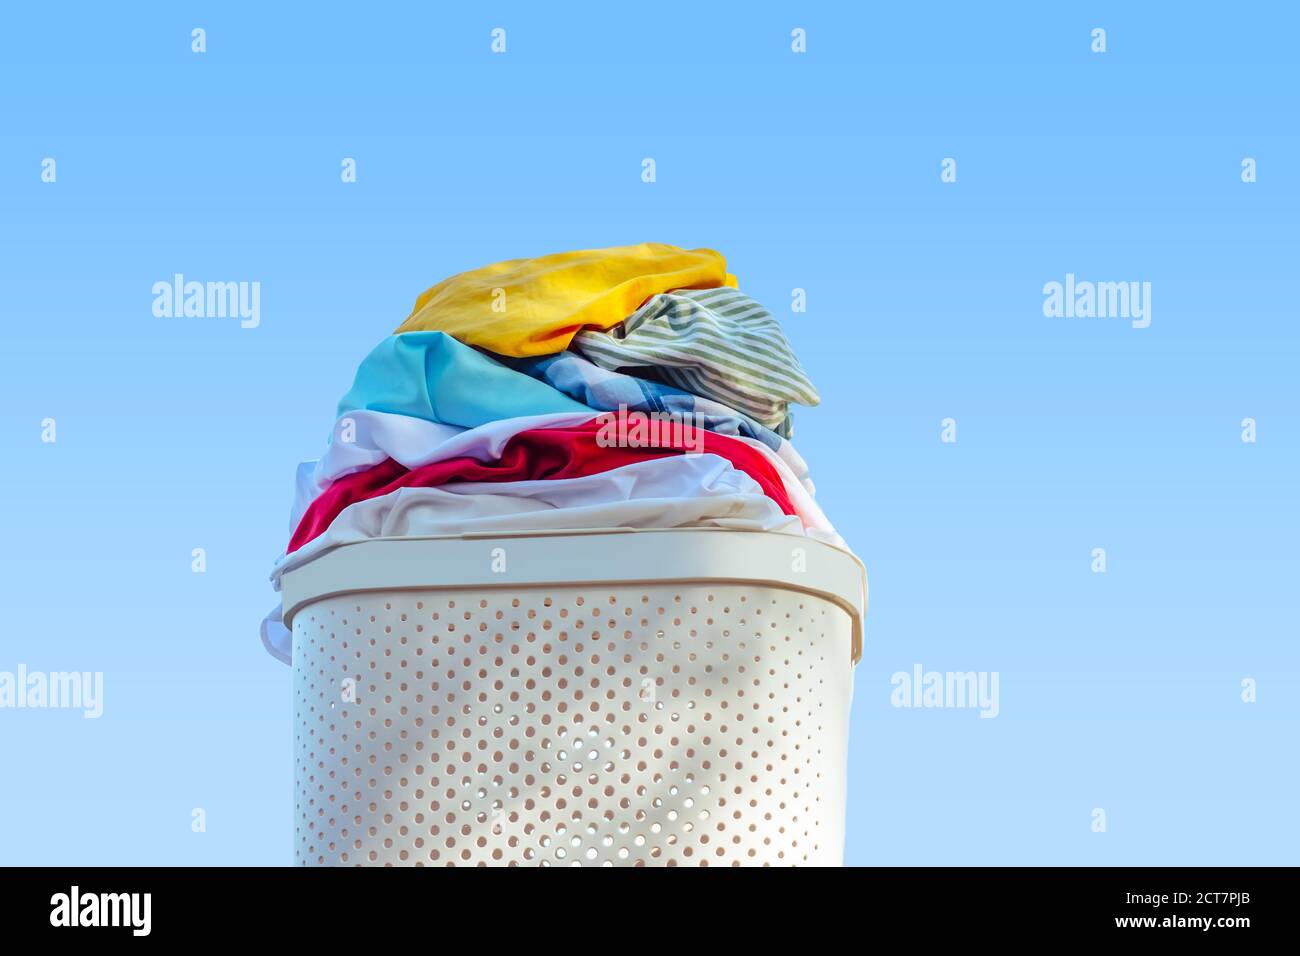 Laundry basket full of clothes.On a blue background Stock Photo